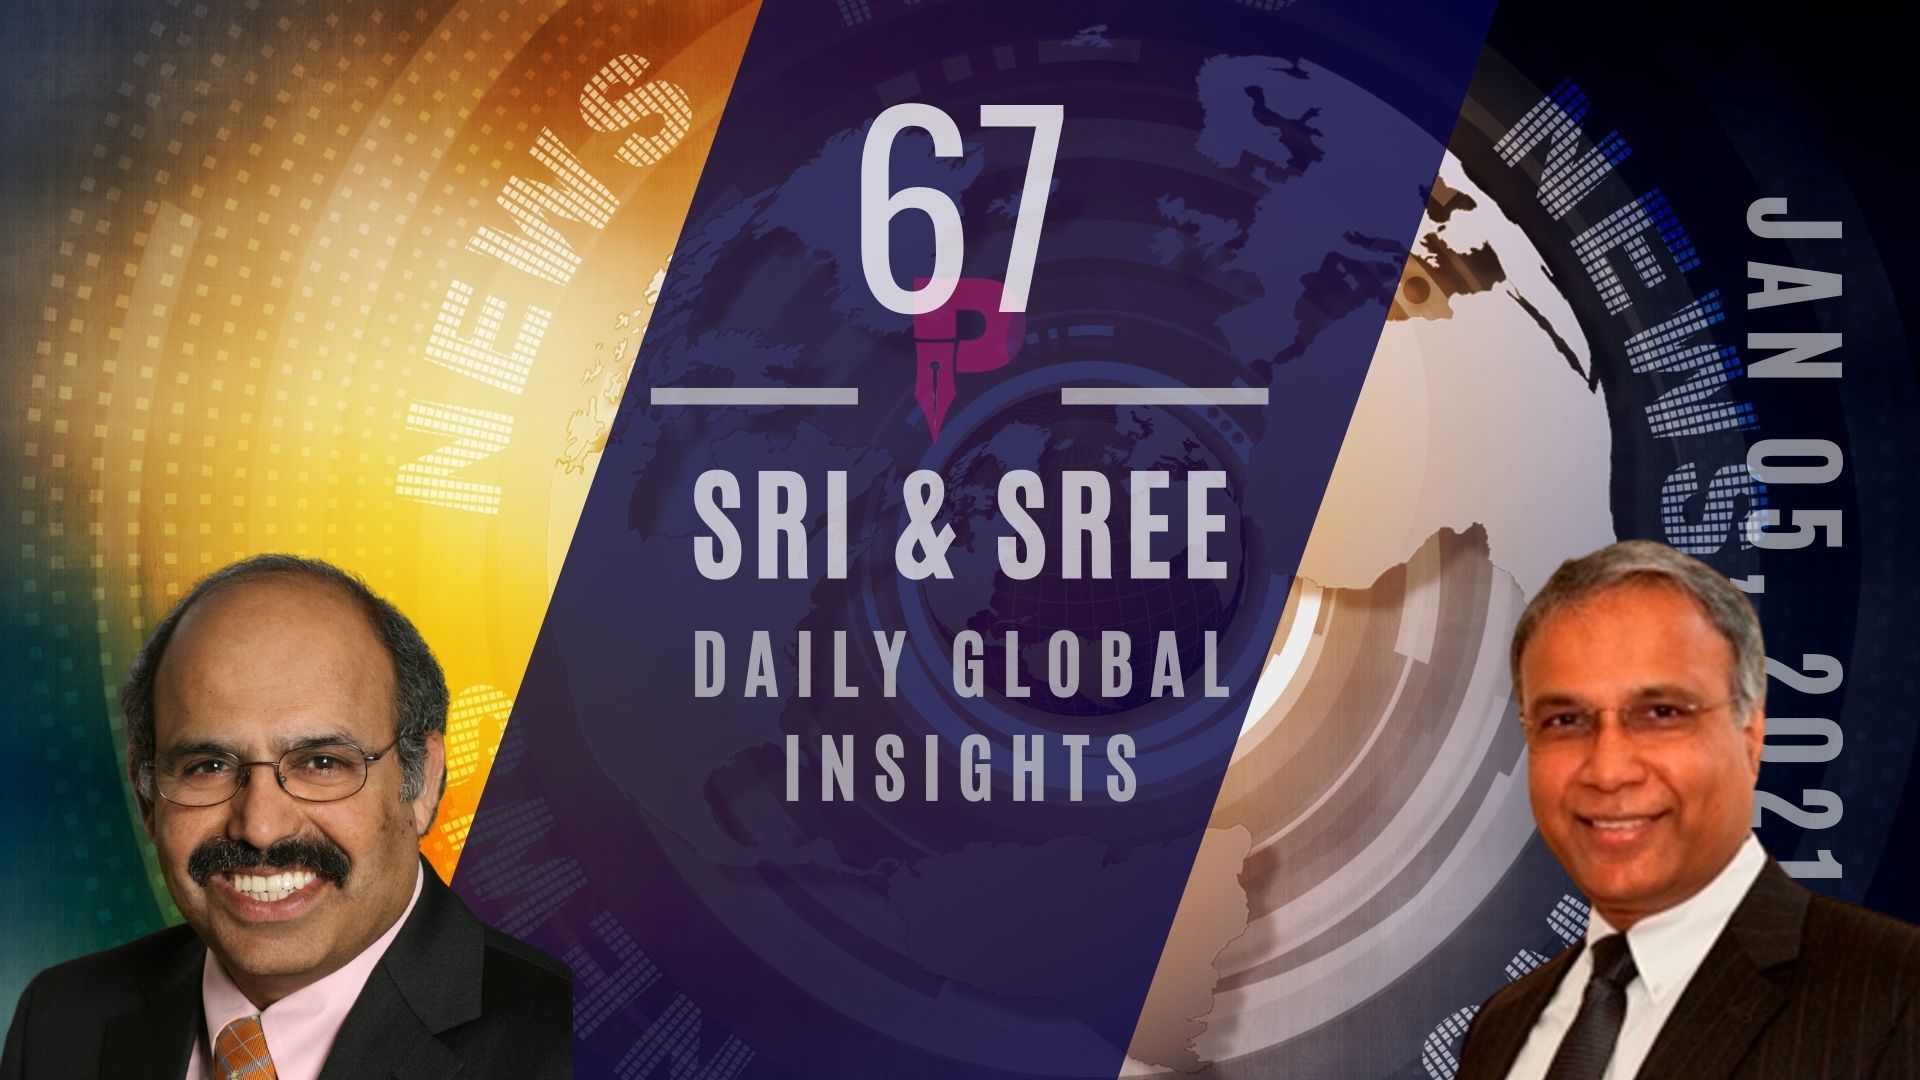 #DailyGlobalInsights #EP67 NYSE Volte-face on de-listing 3 China Telecom cos., US Elections Pence play & more!